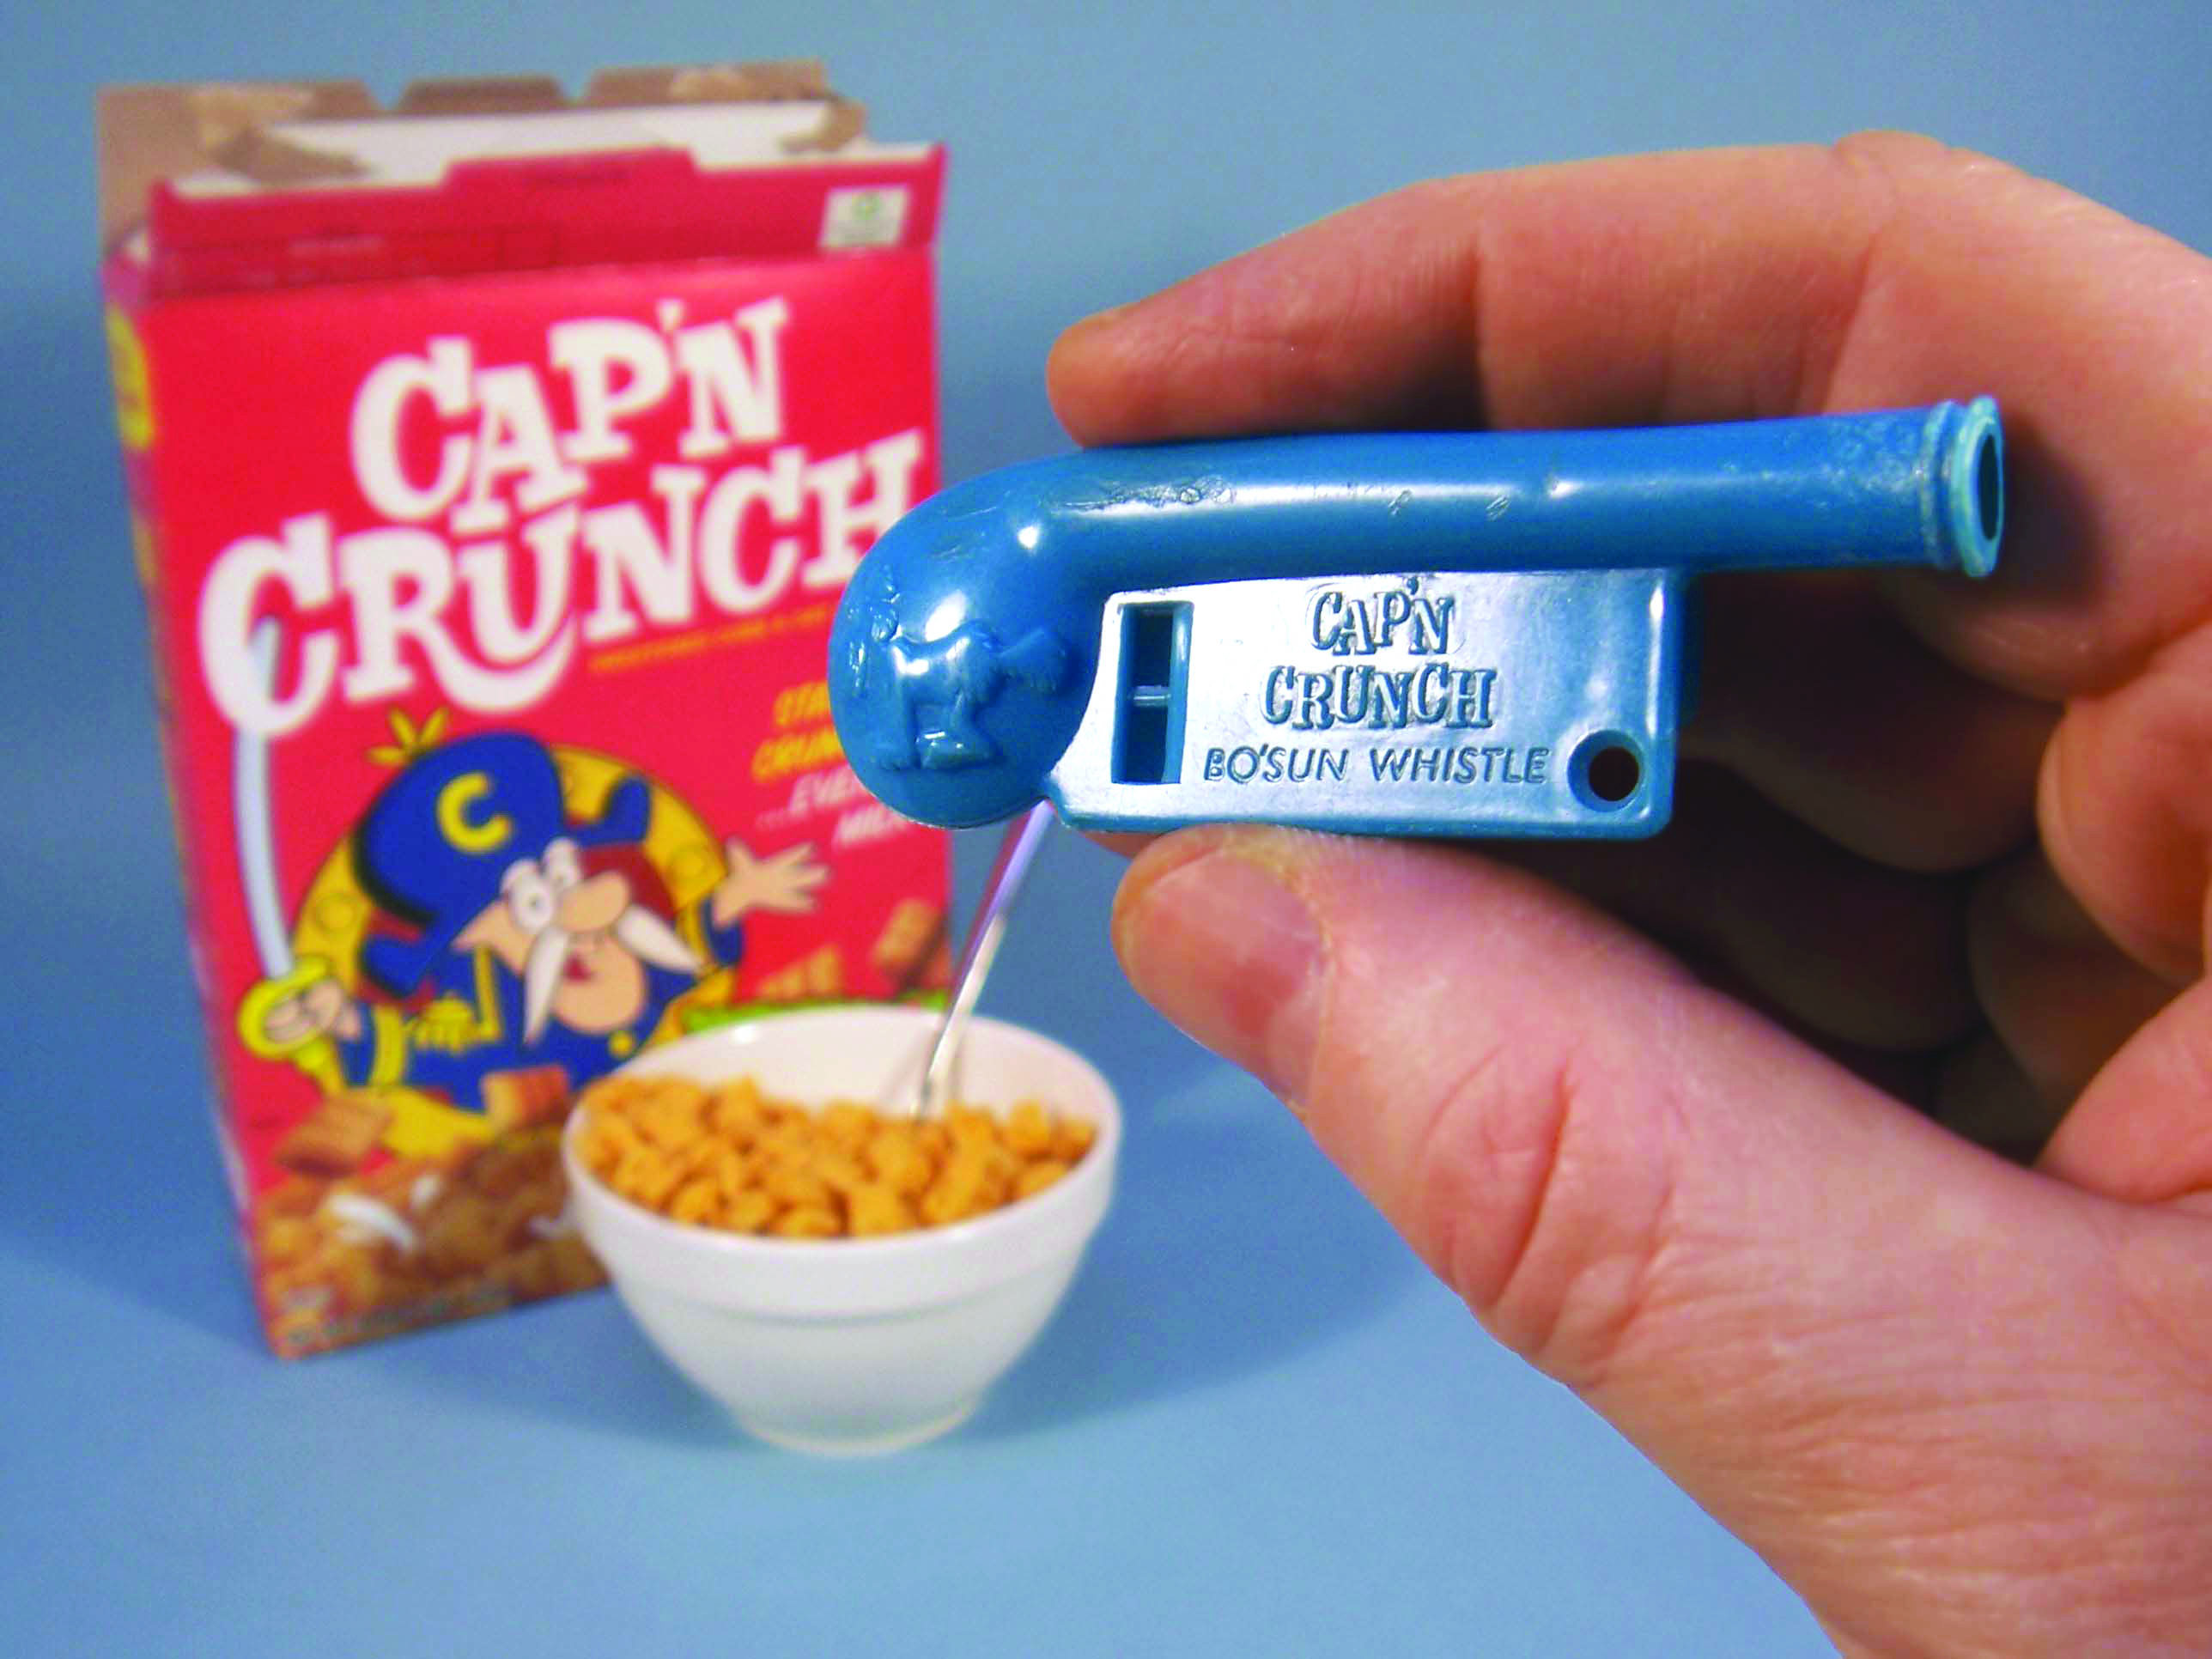 The first hackers hacked into phone nextworks by using Cap'n Crunch toy whistles.